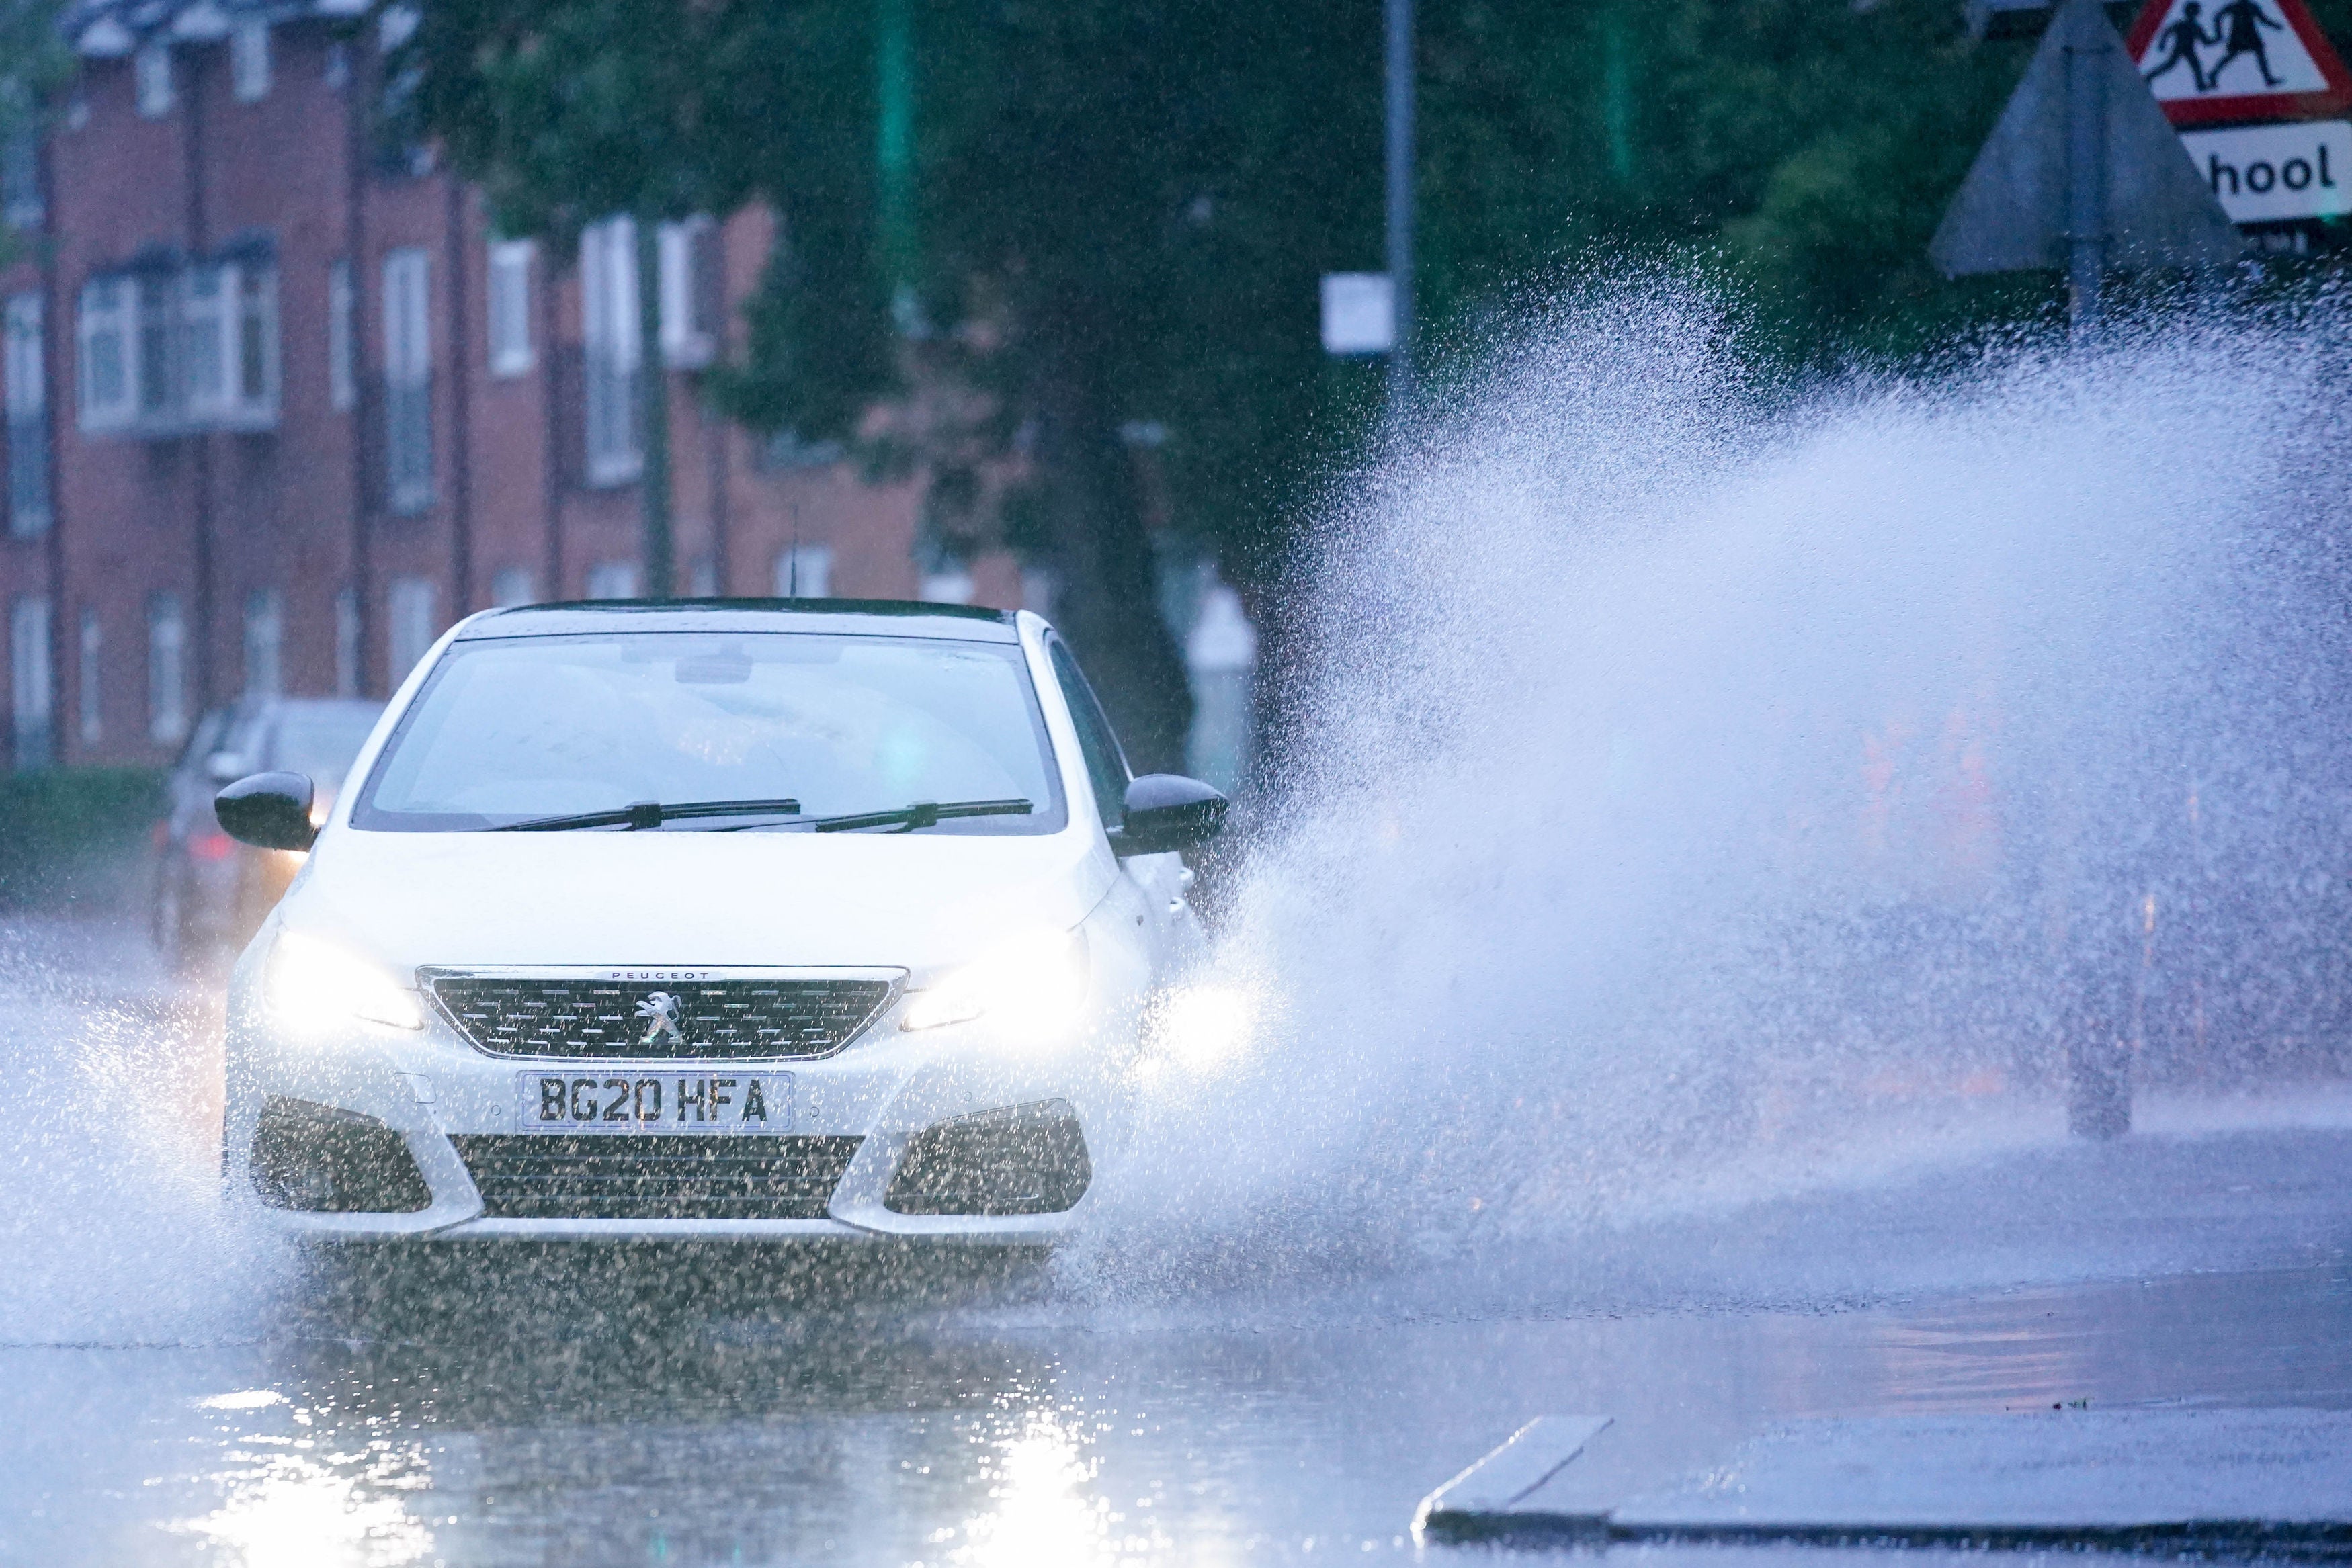 The Met Office warn disruptions to transport is likely, and deep floodwater can cause a risk to life.